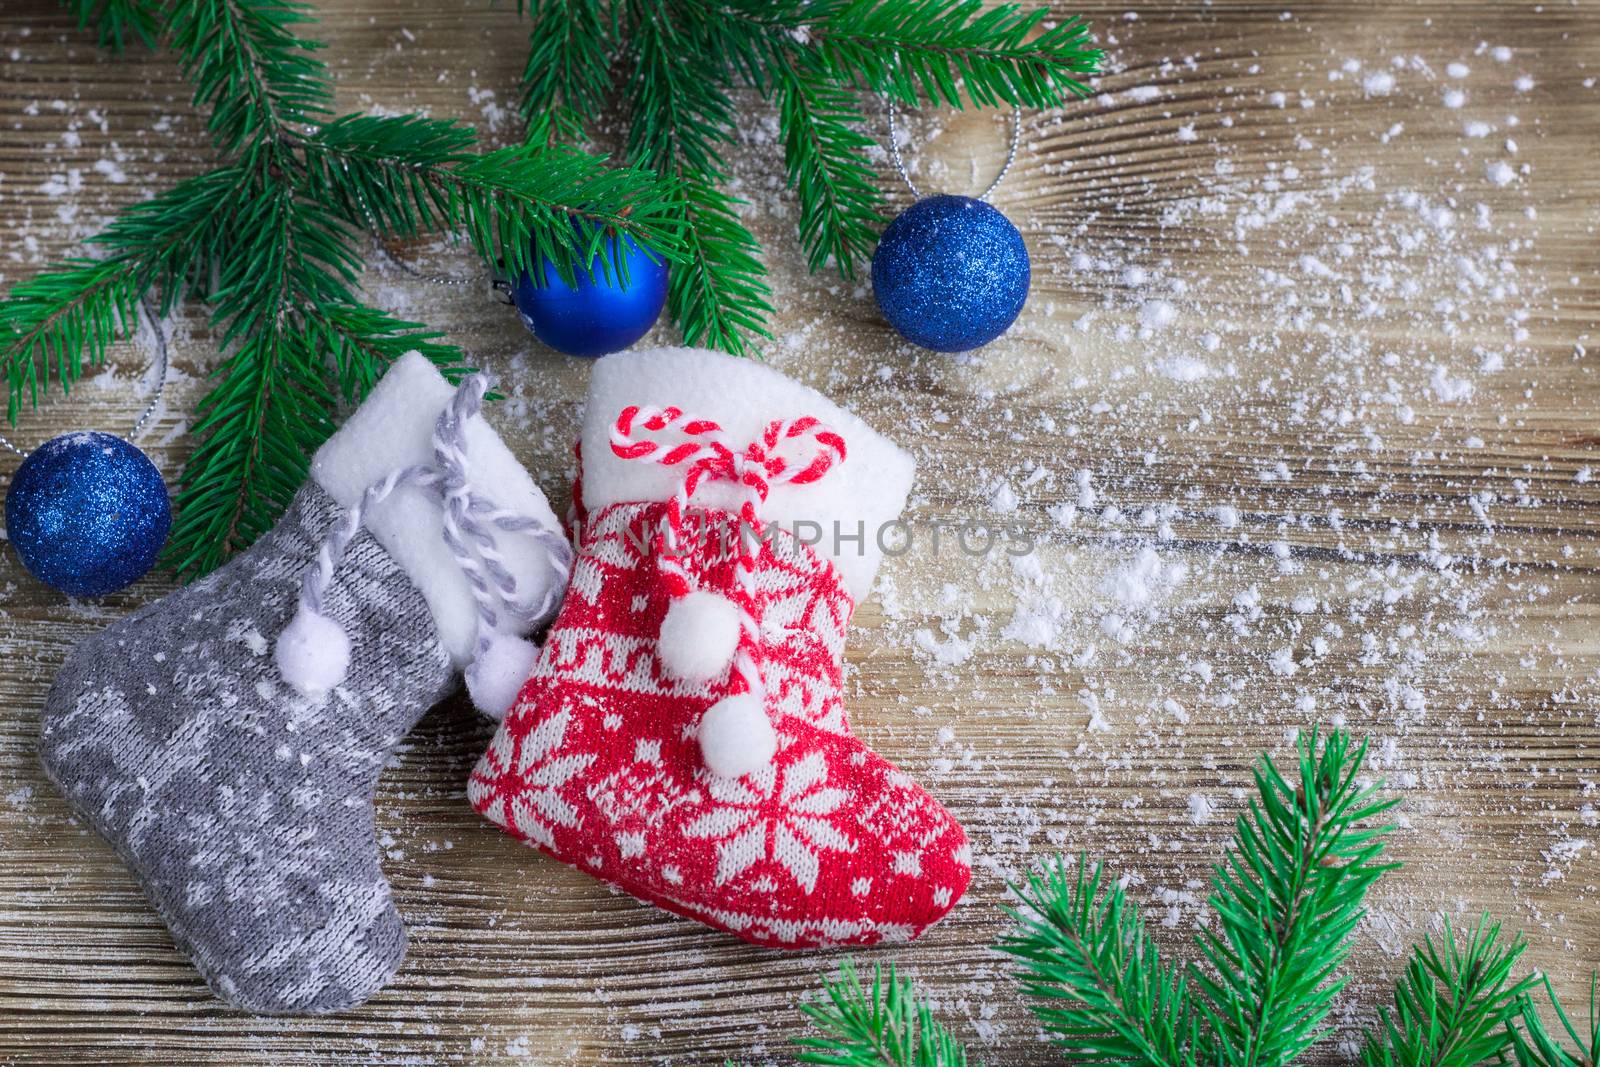 Christmas and New Year winter holiday snowbound composition of stockings on wooden space background with green fir tree branches and balls ornament